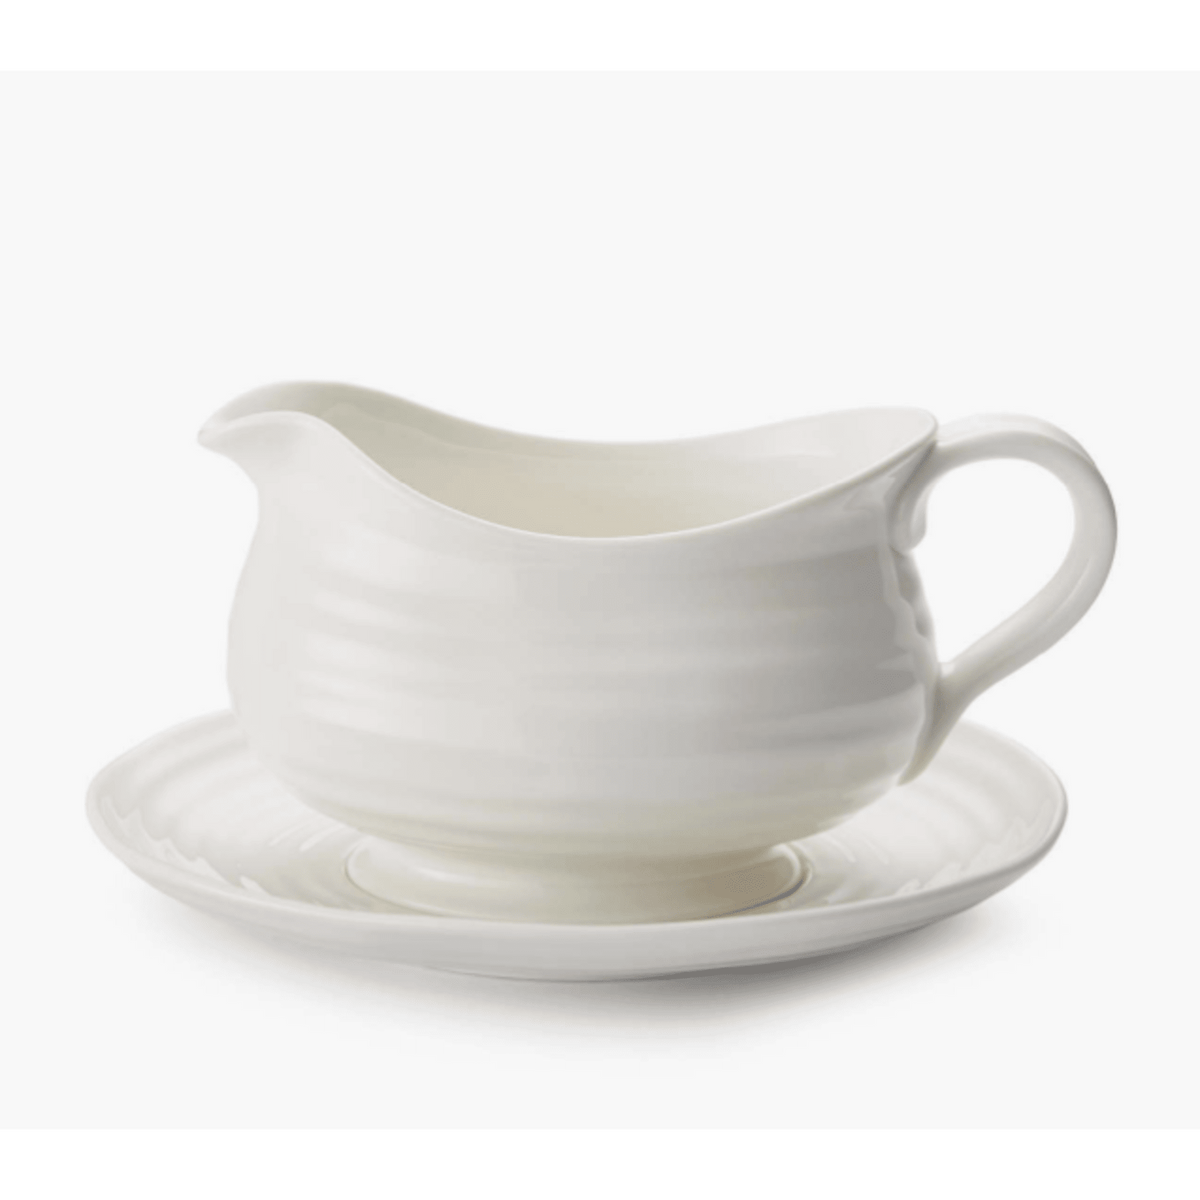 Portmeirion Sophie Conran Gravy Boat and Stand